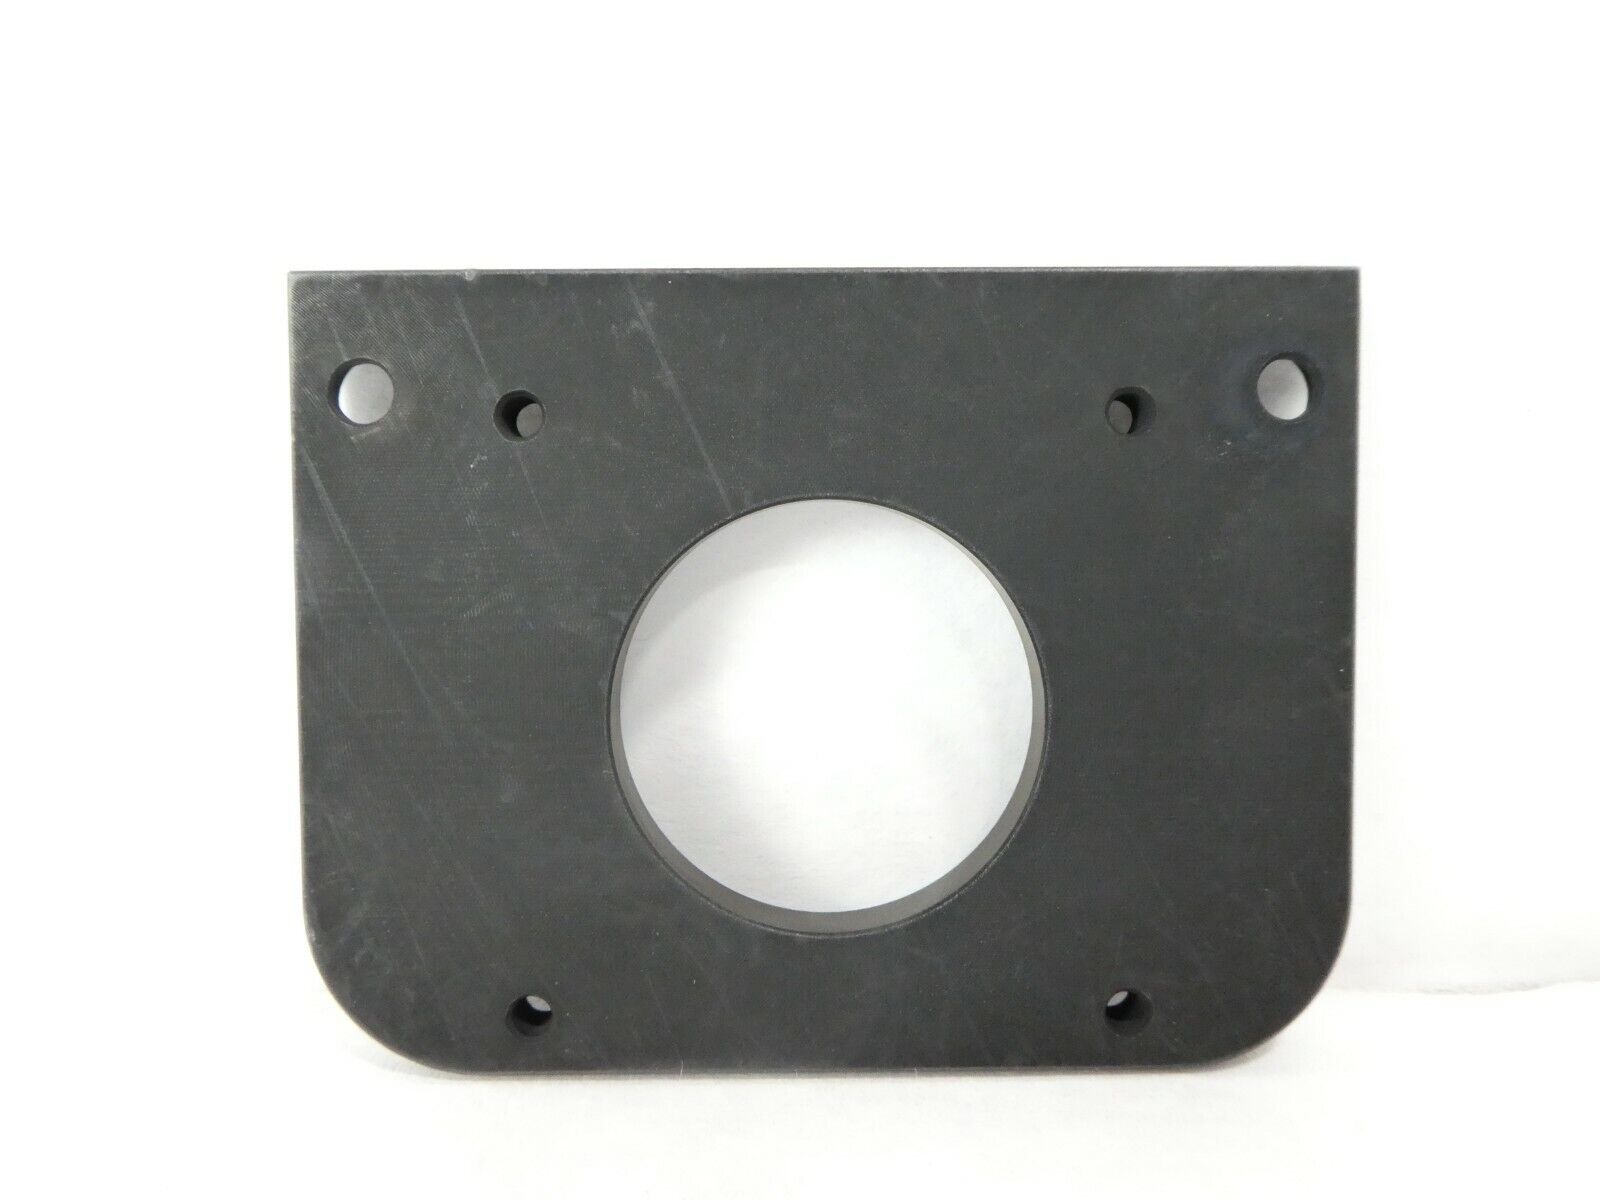 ASM Advanced Semiconductor Materials 1015-944-01 Motor Plate New Surplus